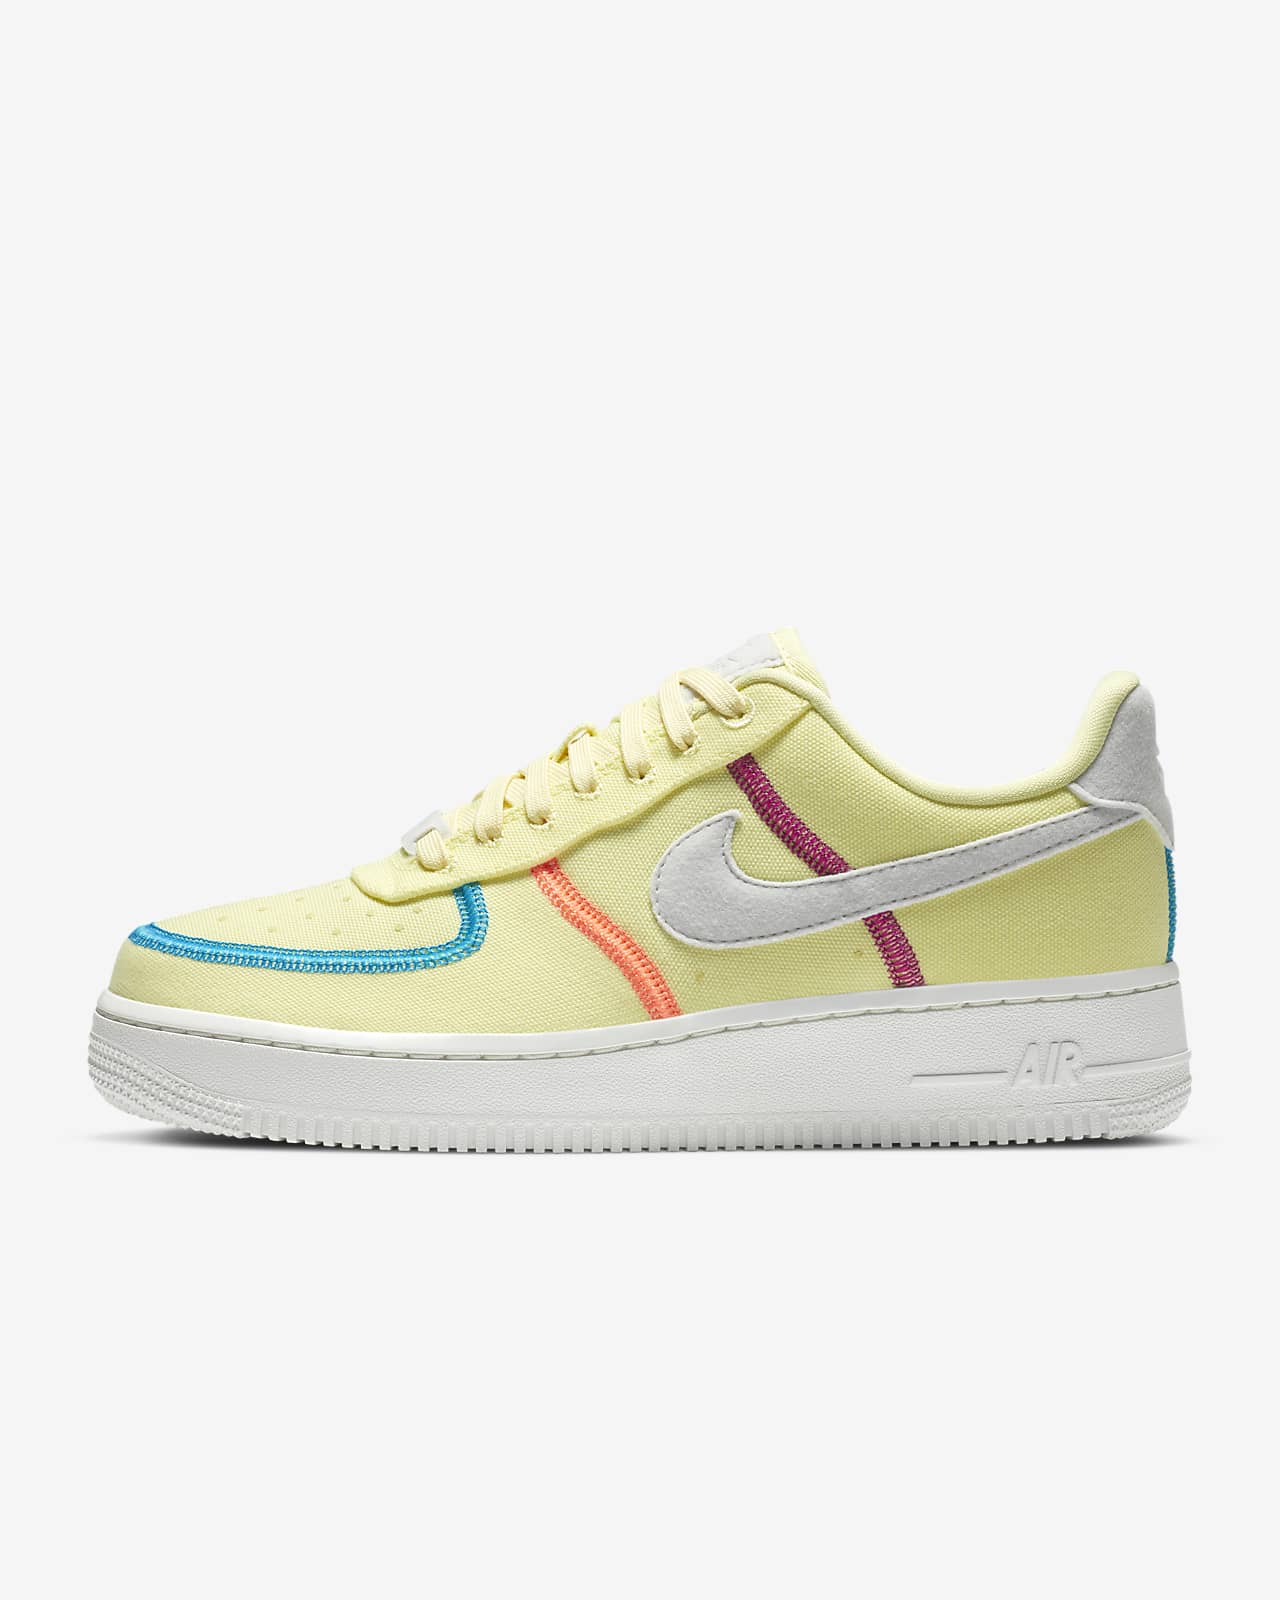 Chaussure Nike Air Force 1 '07 LX pour Femme